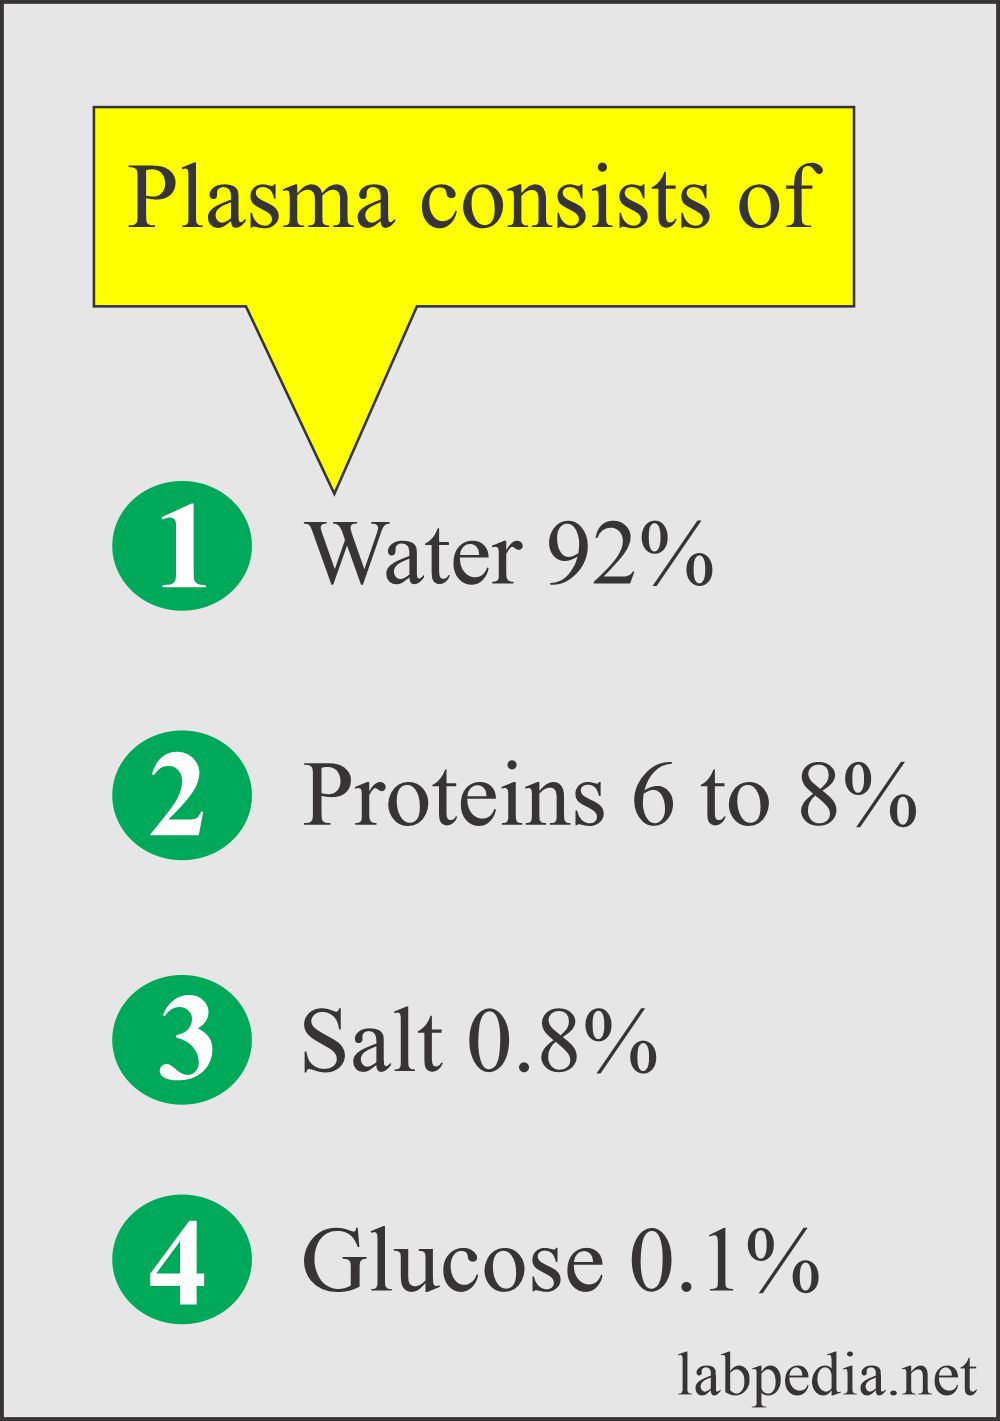 Plasma and Red Blood Cells Contents Difference: Contents of the plasma